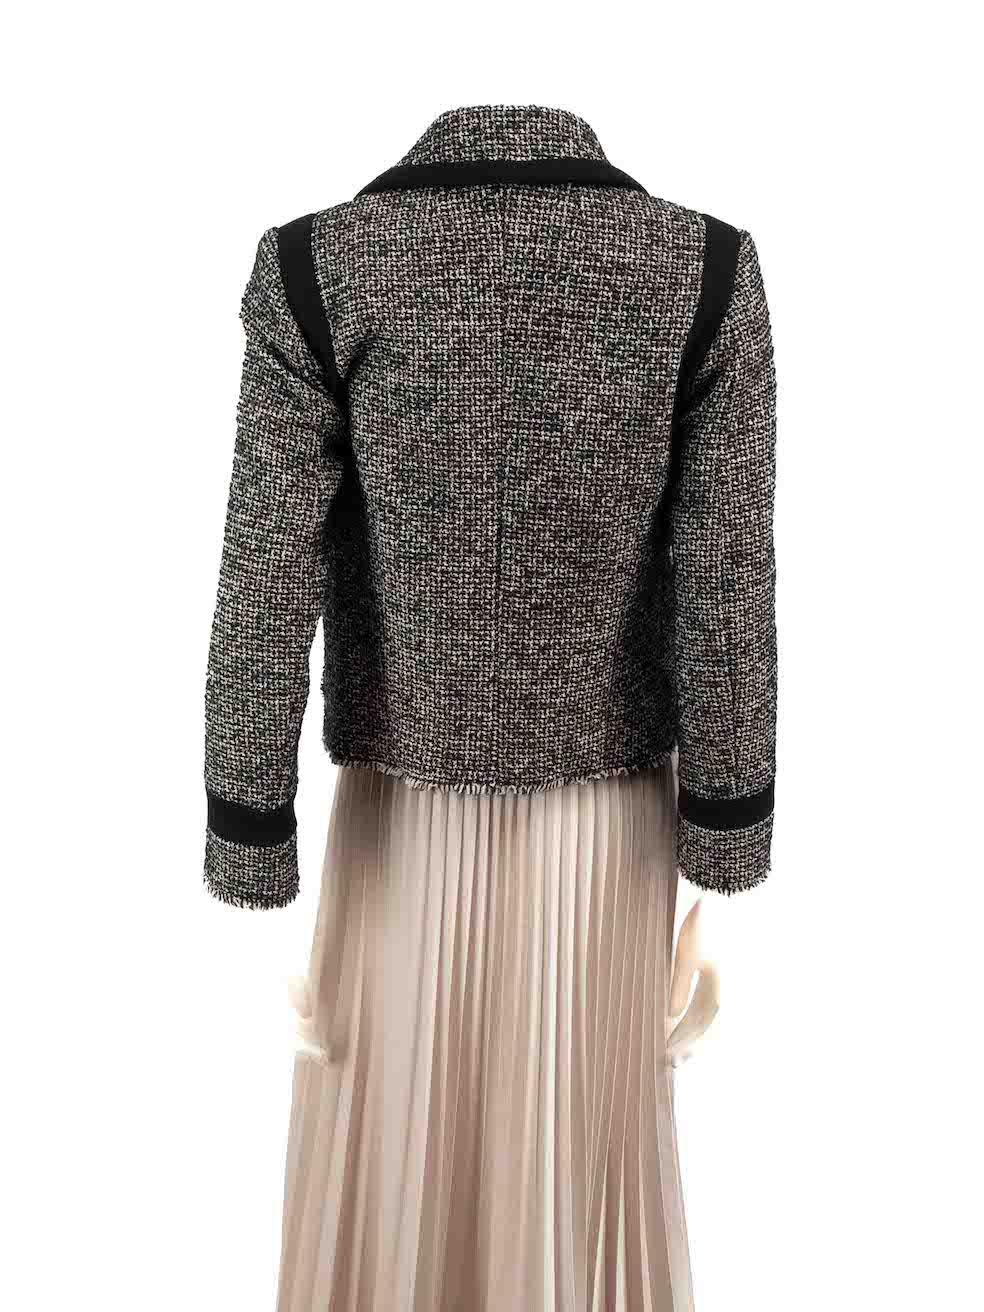 Philosophy di Lorenzo Serafini Grey Tweed Faux Pearl Jacket Size M In Excellent Condition For Sale In London, GB